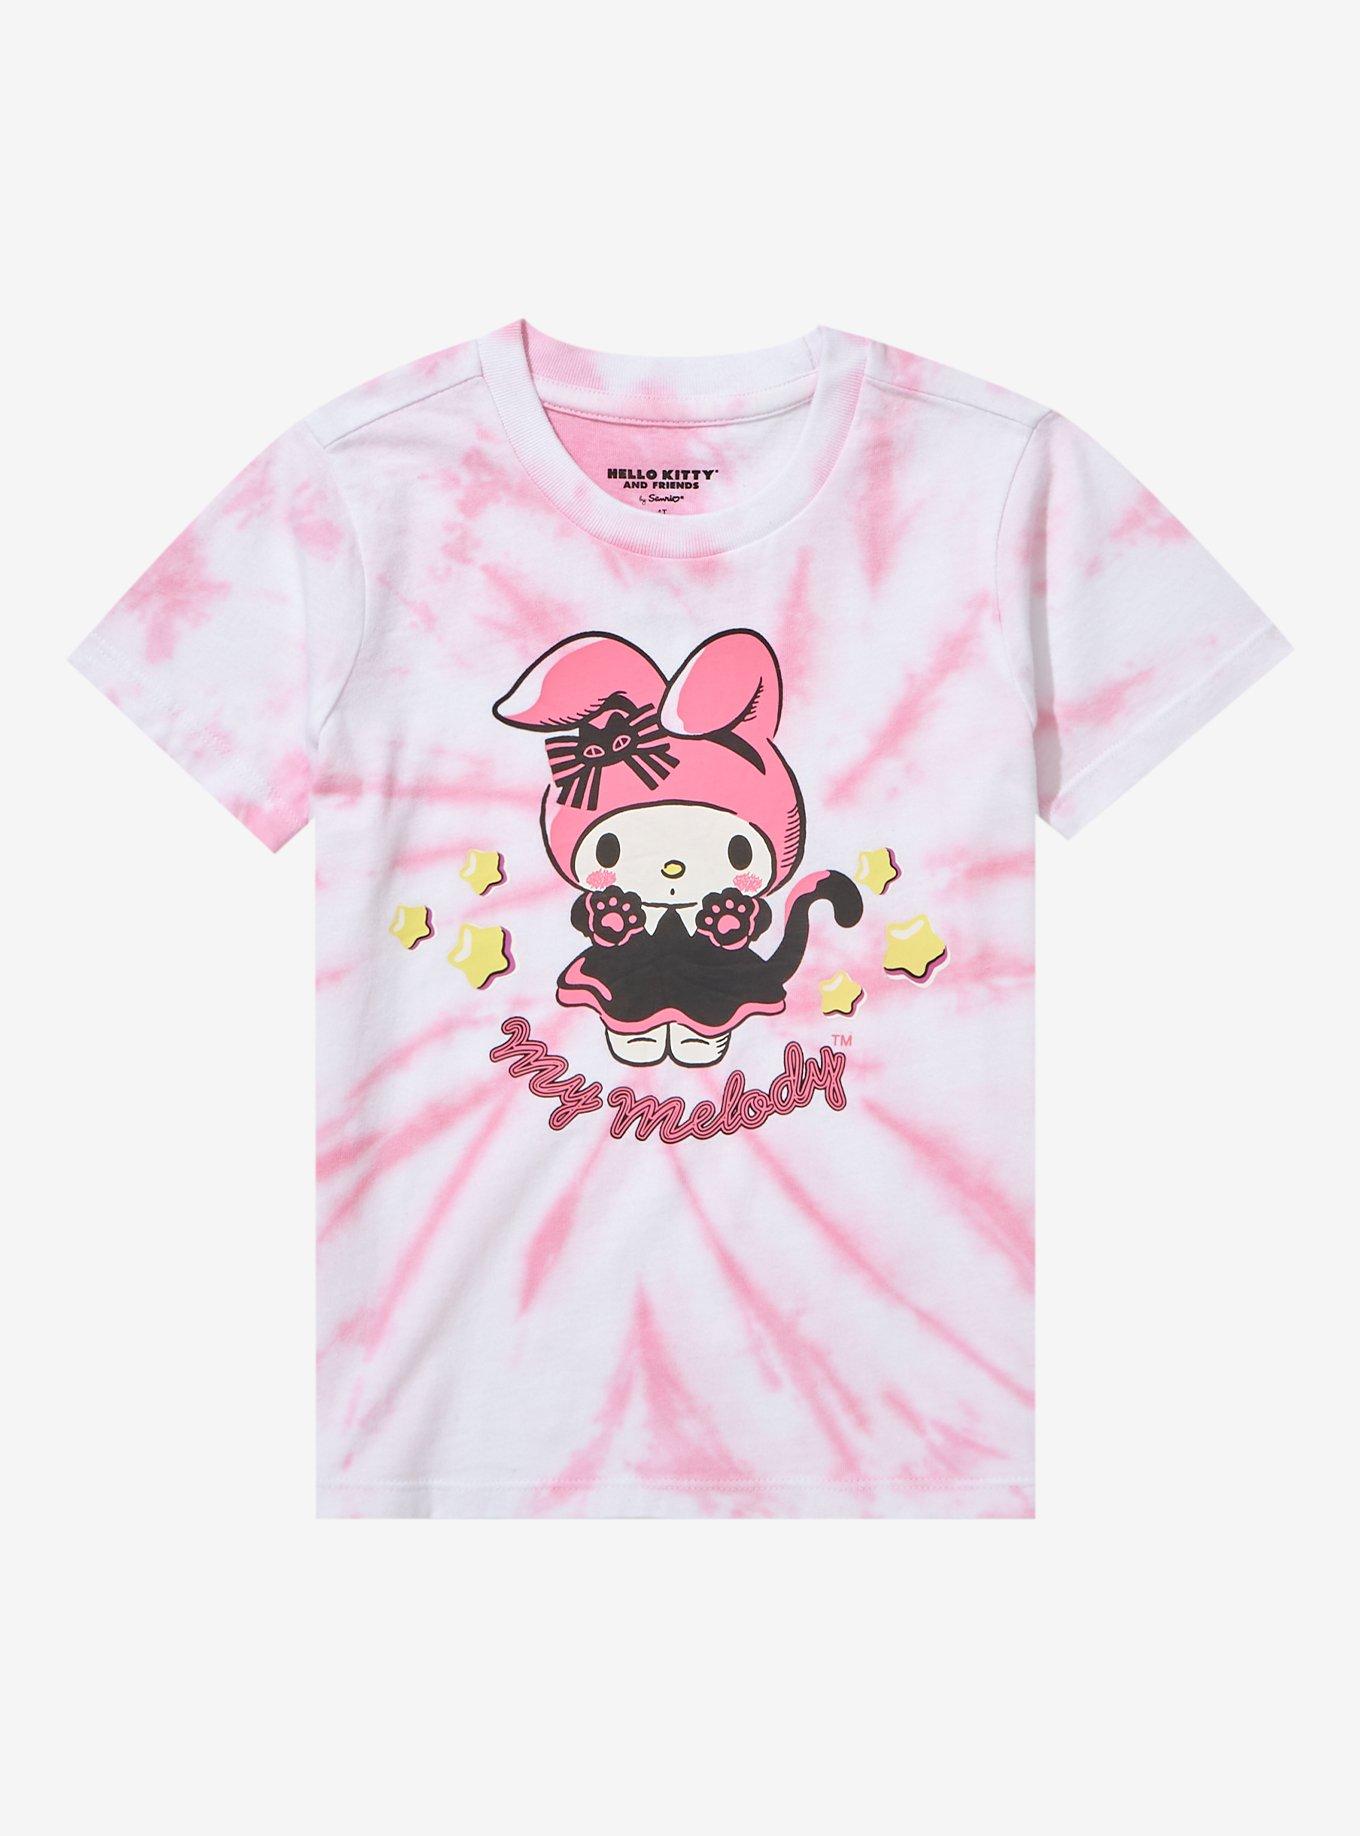 Sanrio My Melody Halloween Costume Tie-Dye Toddler T-Shirt - BoxLunch Exclusive, TIE DYE, hi-res